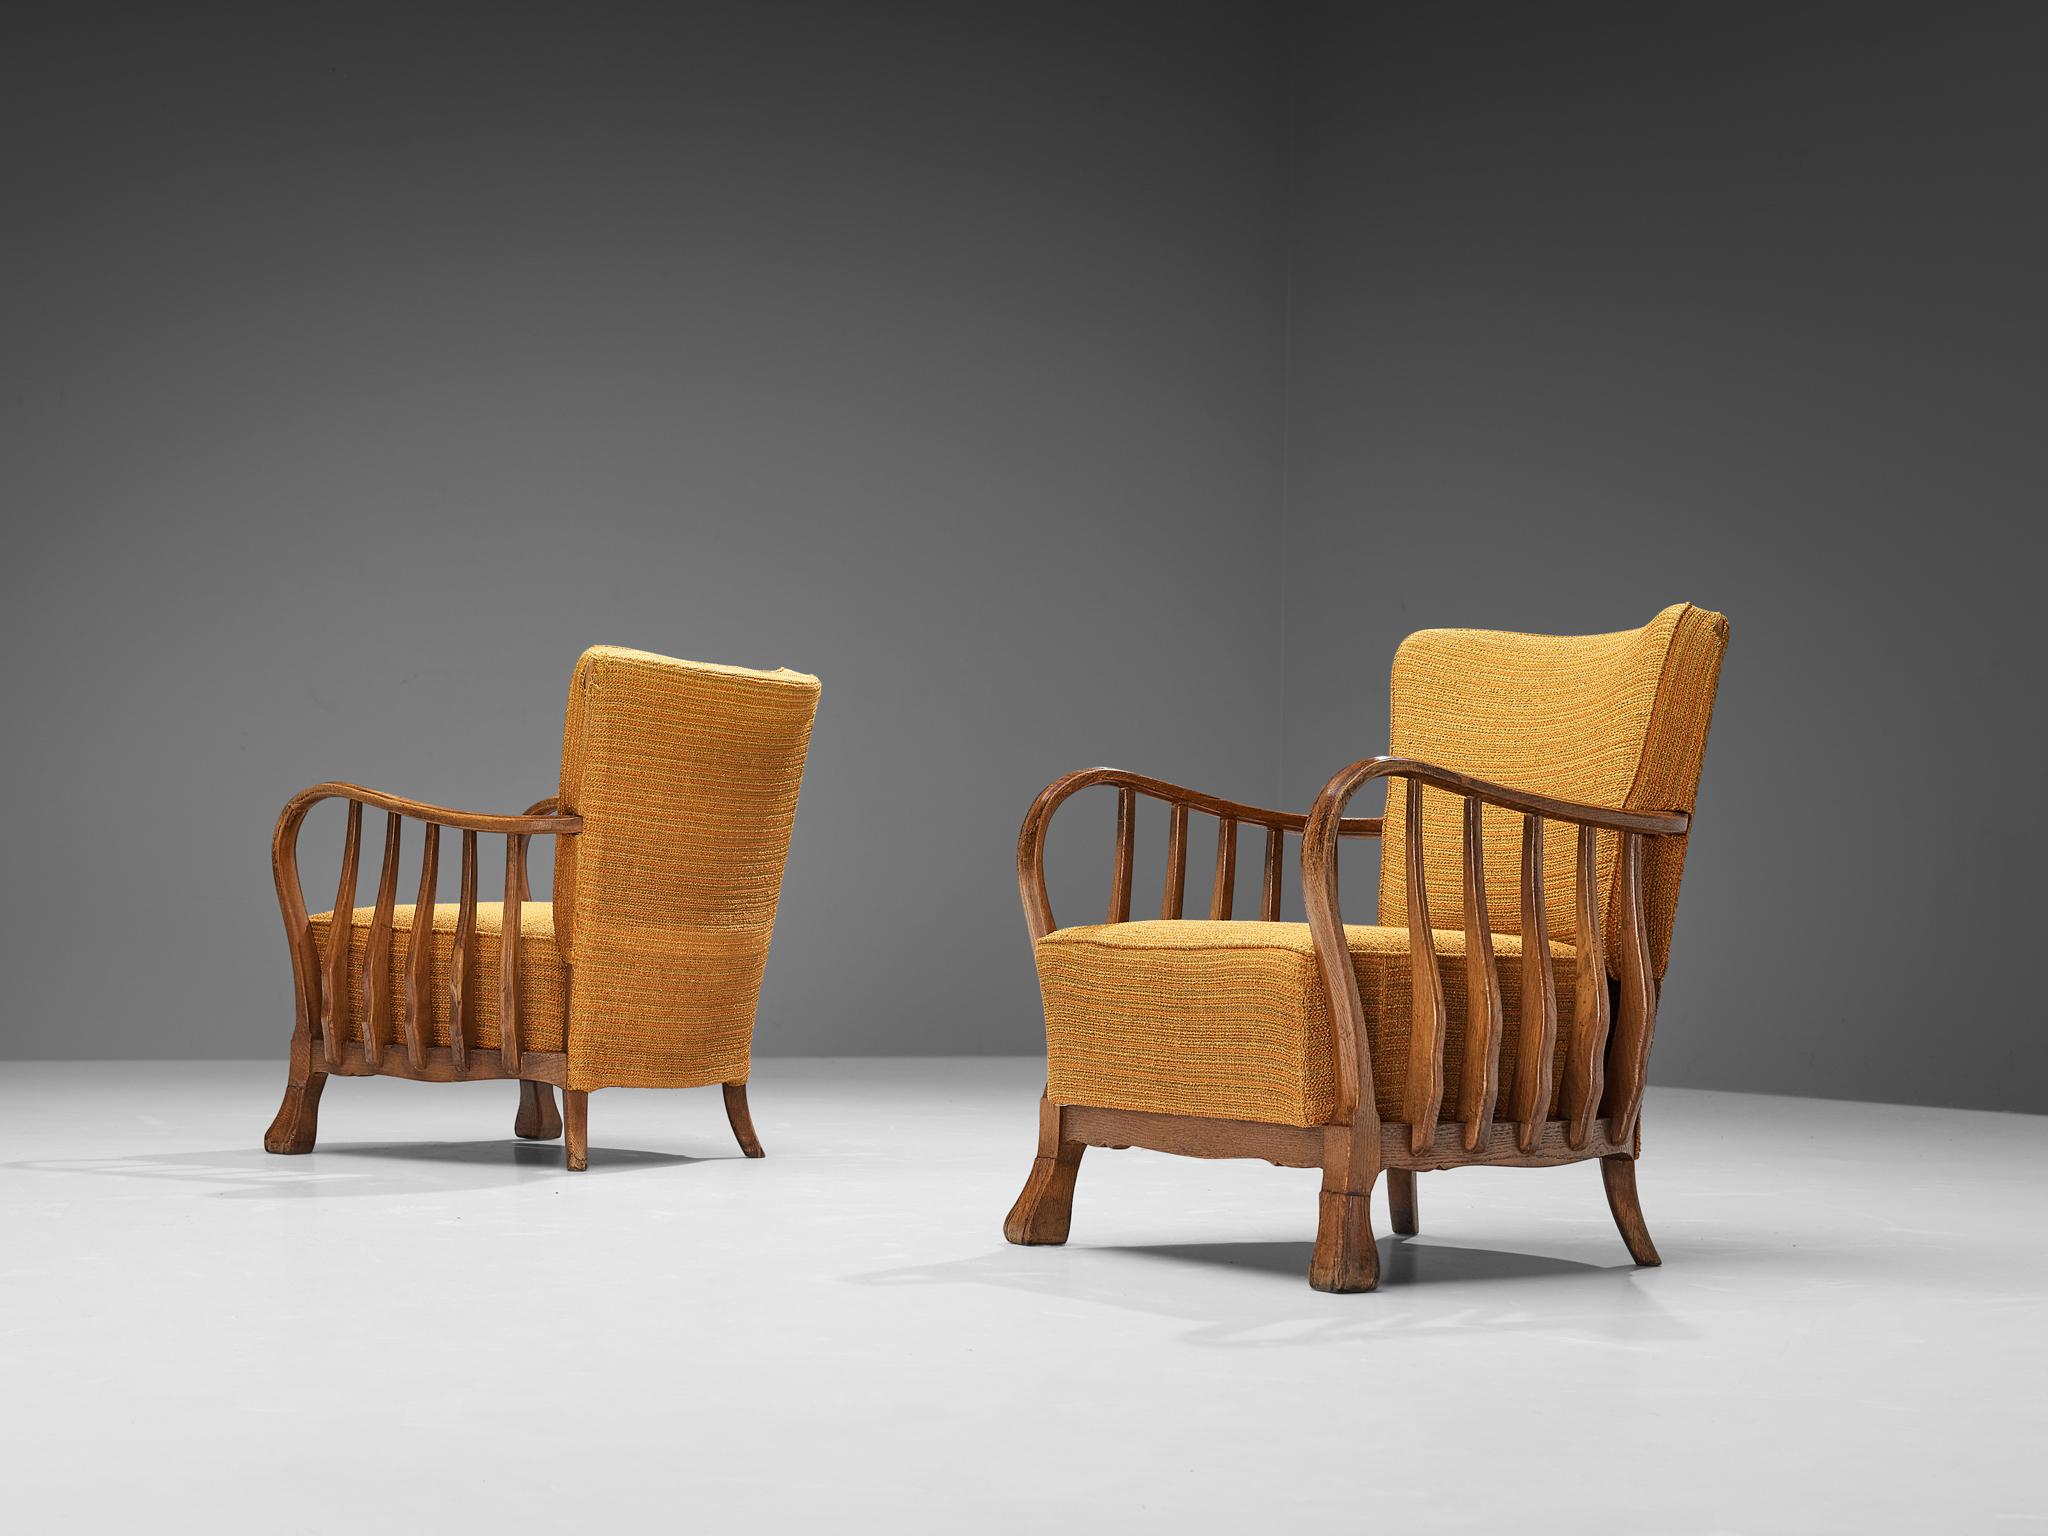 Vittorio Valabrega, pair of armchairs, oak, fabric, Italy, 1920s

This eccentric pair of lounge chairs embodies a splendid construction of subtle lines and curvaceous shapes. Remarkable detail and the signature for this design are the armrests that